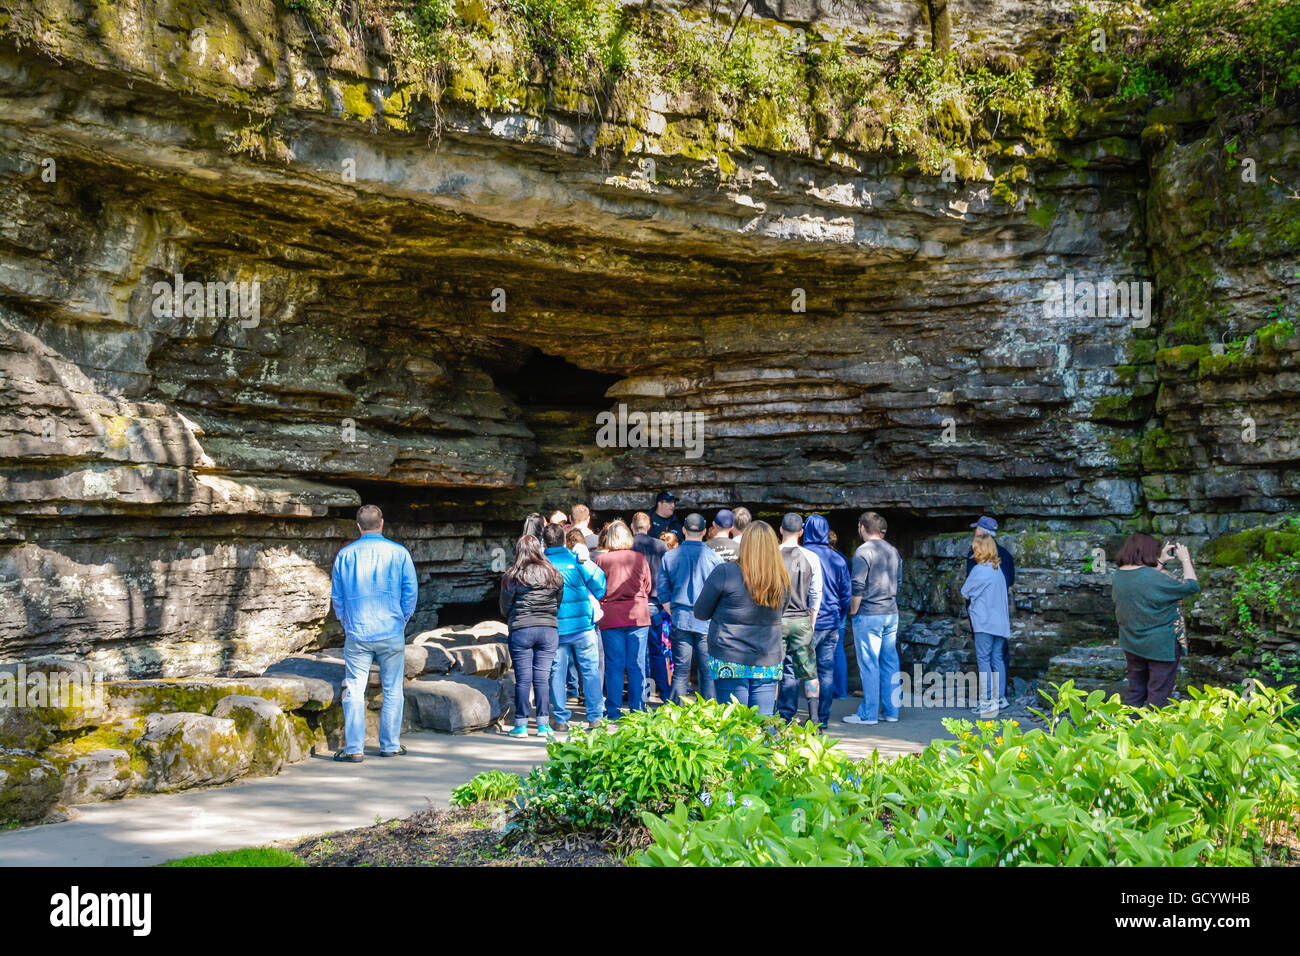 People on guided tour of Jack Daniel's Distillery grounds' location site of Cave Spring water in Lynchburg, TN Stock Photo